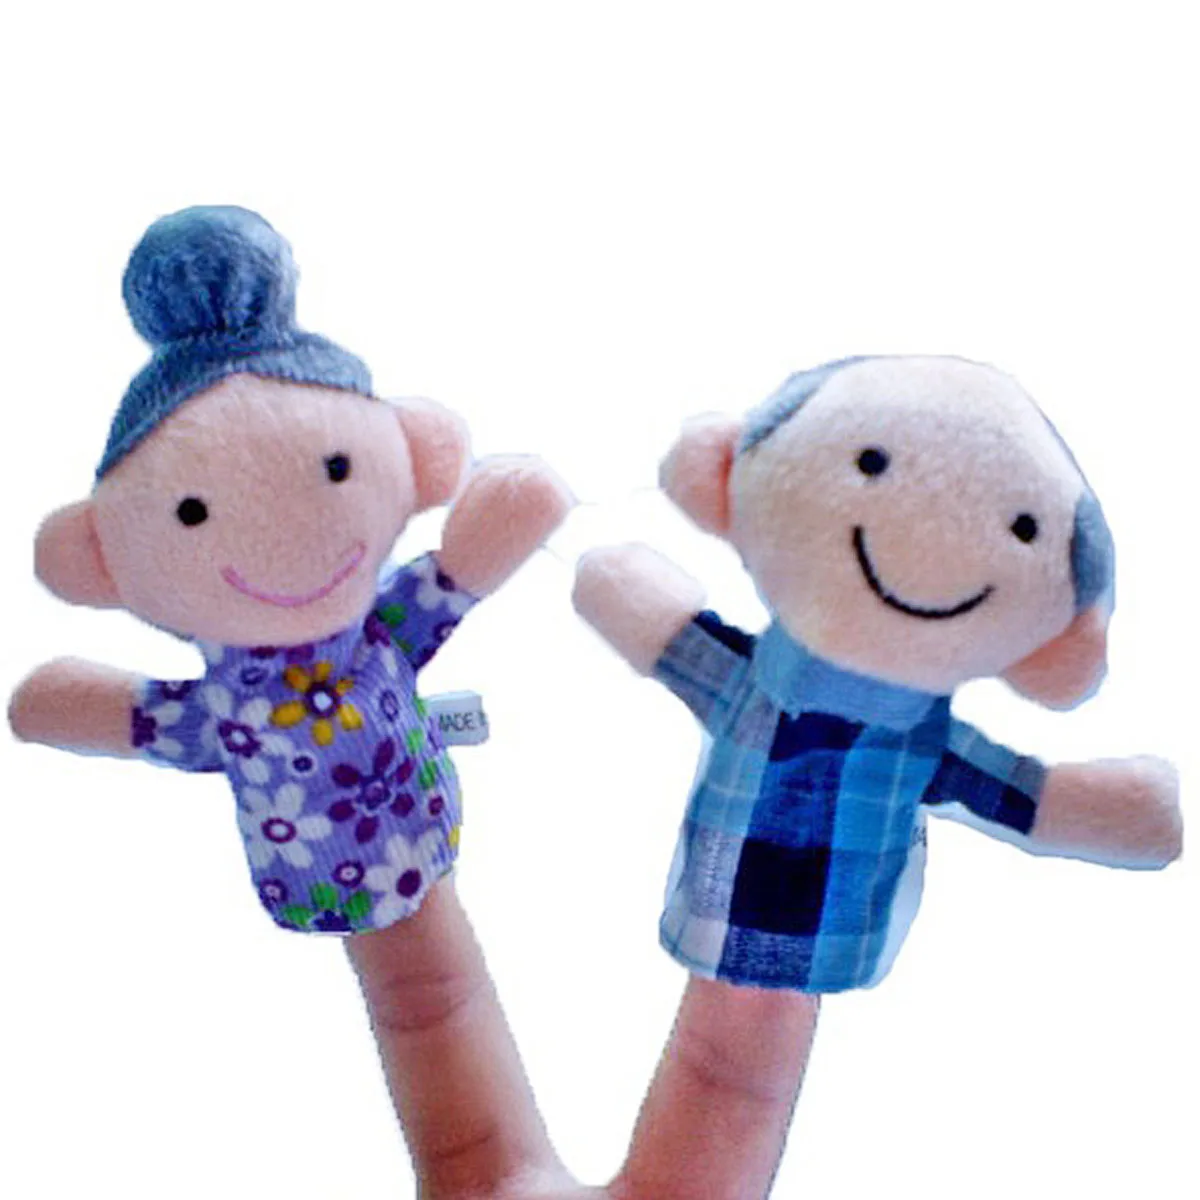 6 Pcs/lot Finger Family Puppets Set Mini Plush Finger Puppets Baby Toy Boys Girls Educational Story Hand Puppet Cloth Doll Toys